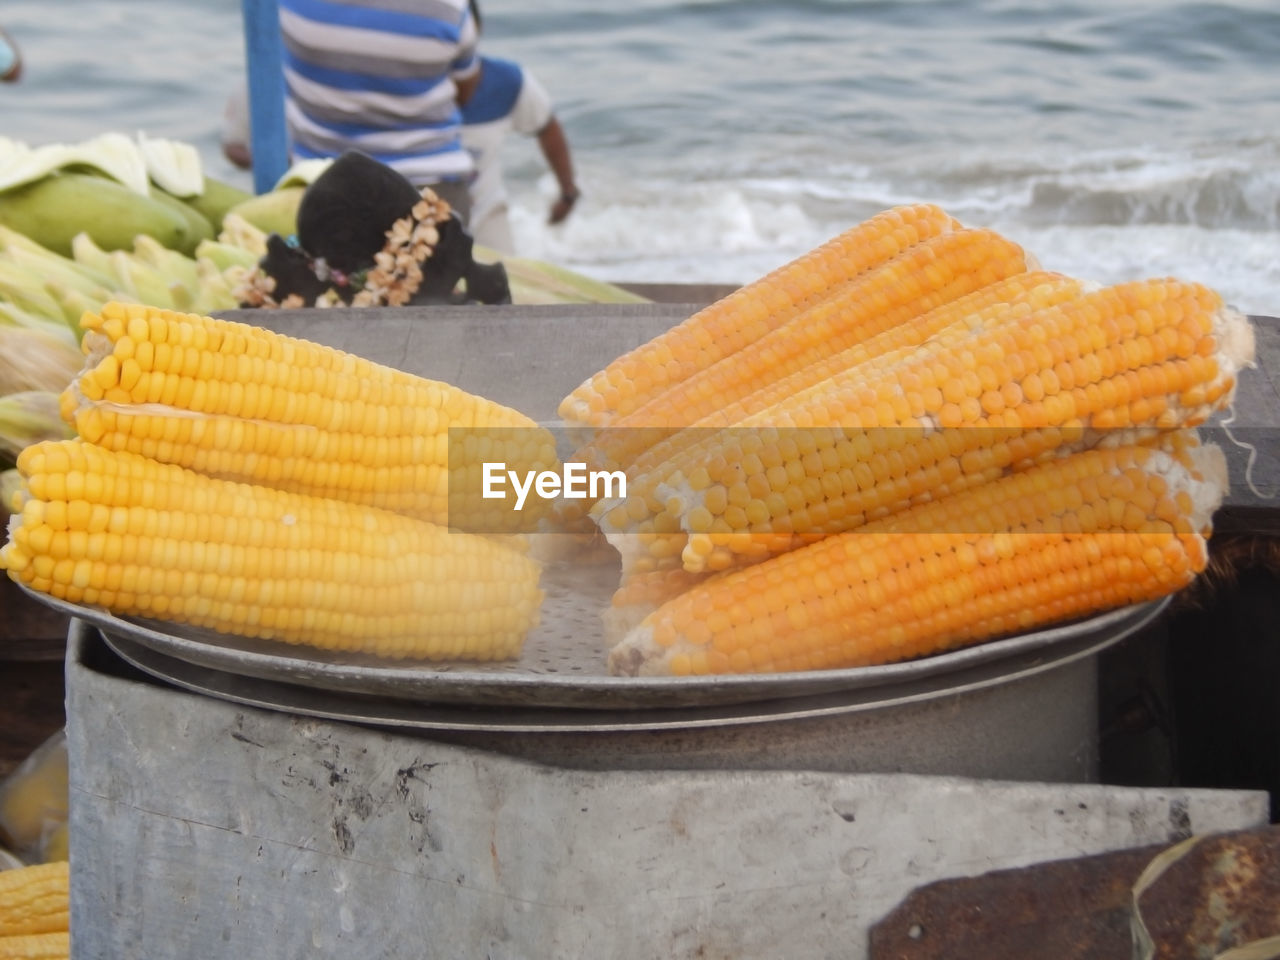 Steam boiled corn, a delicious street food